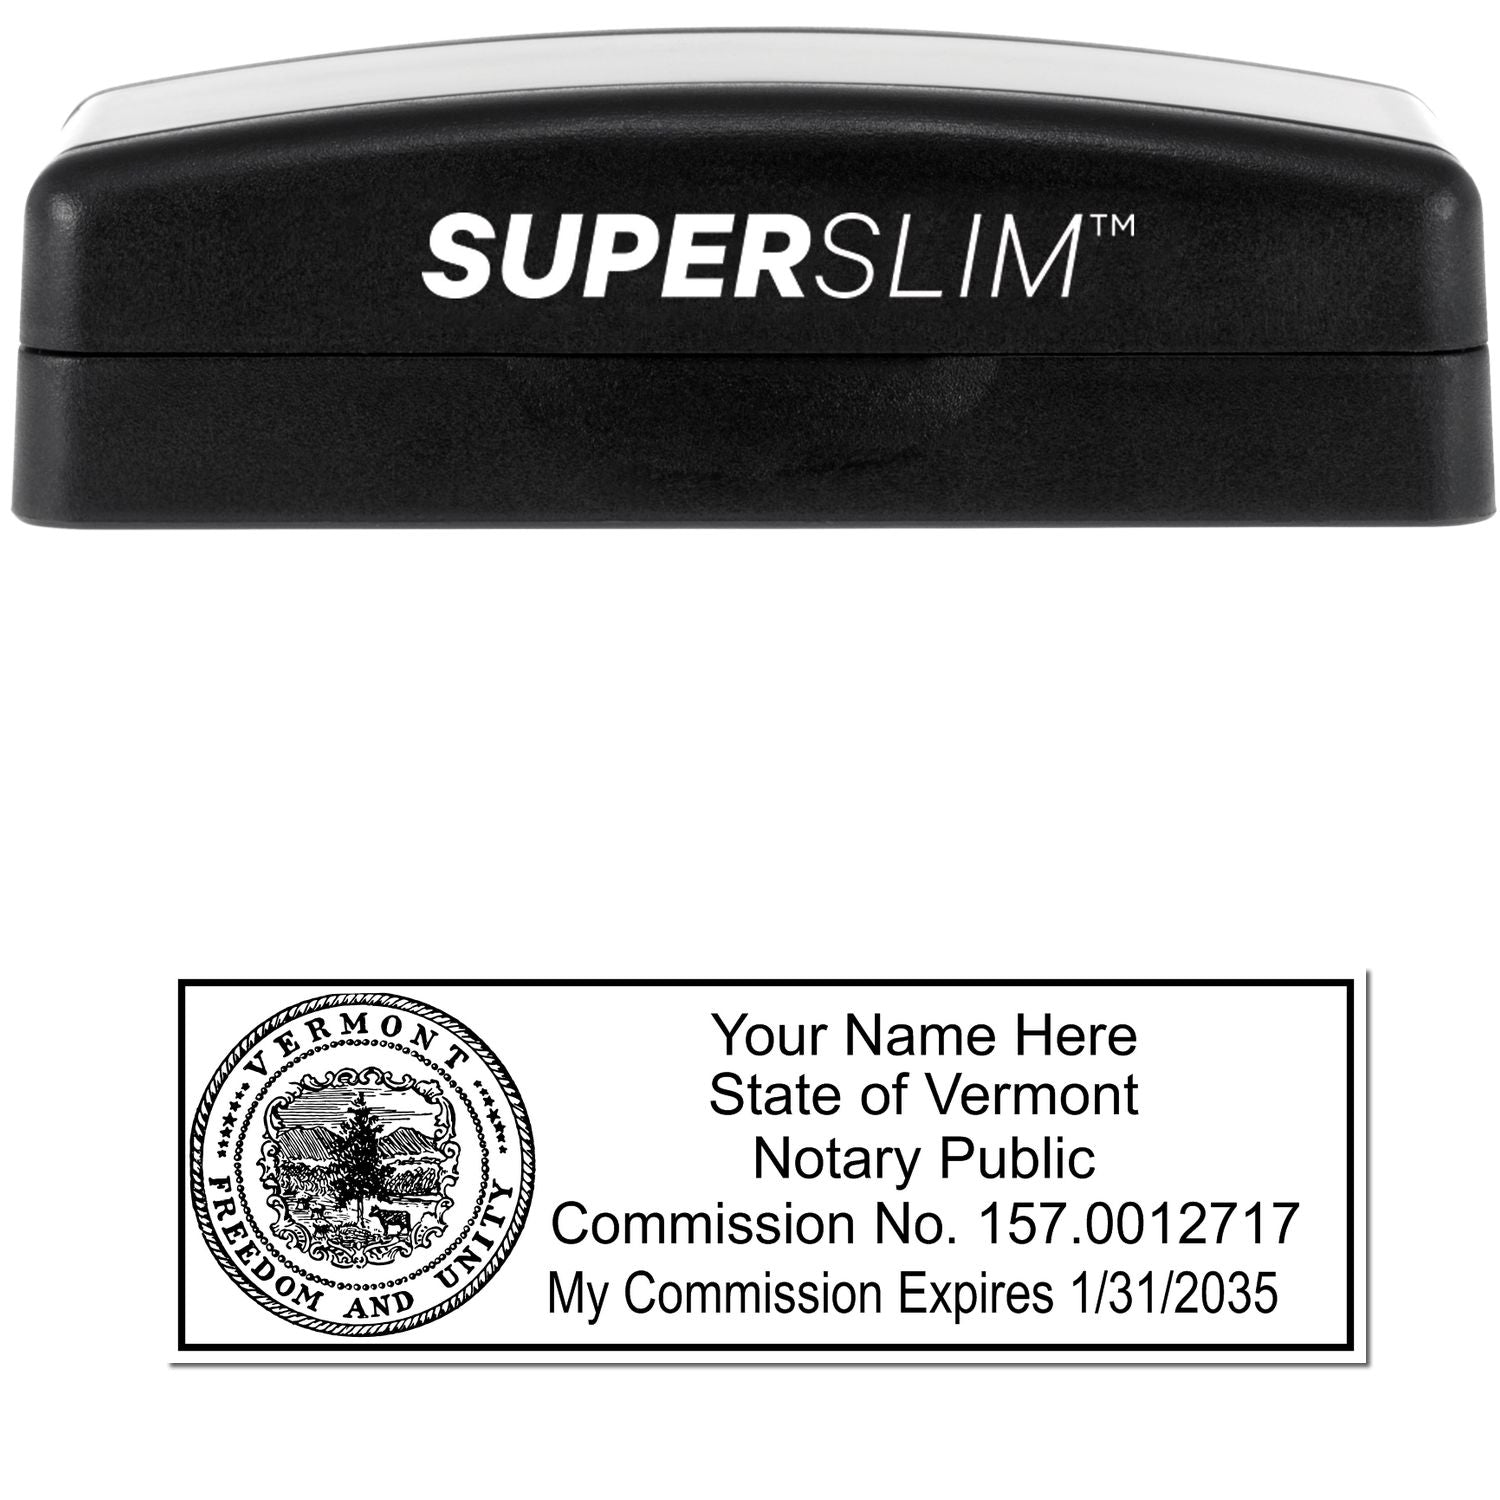 The main image for the Super Slim Vermont Notary Public Stamp depicting a sample of the imprint and electronic files